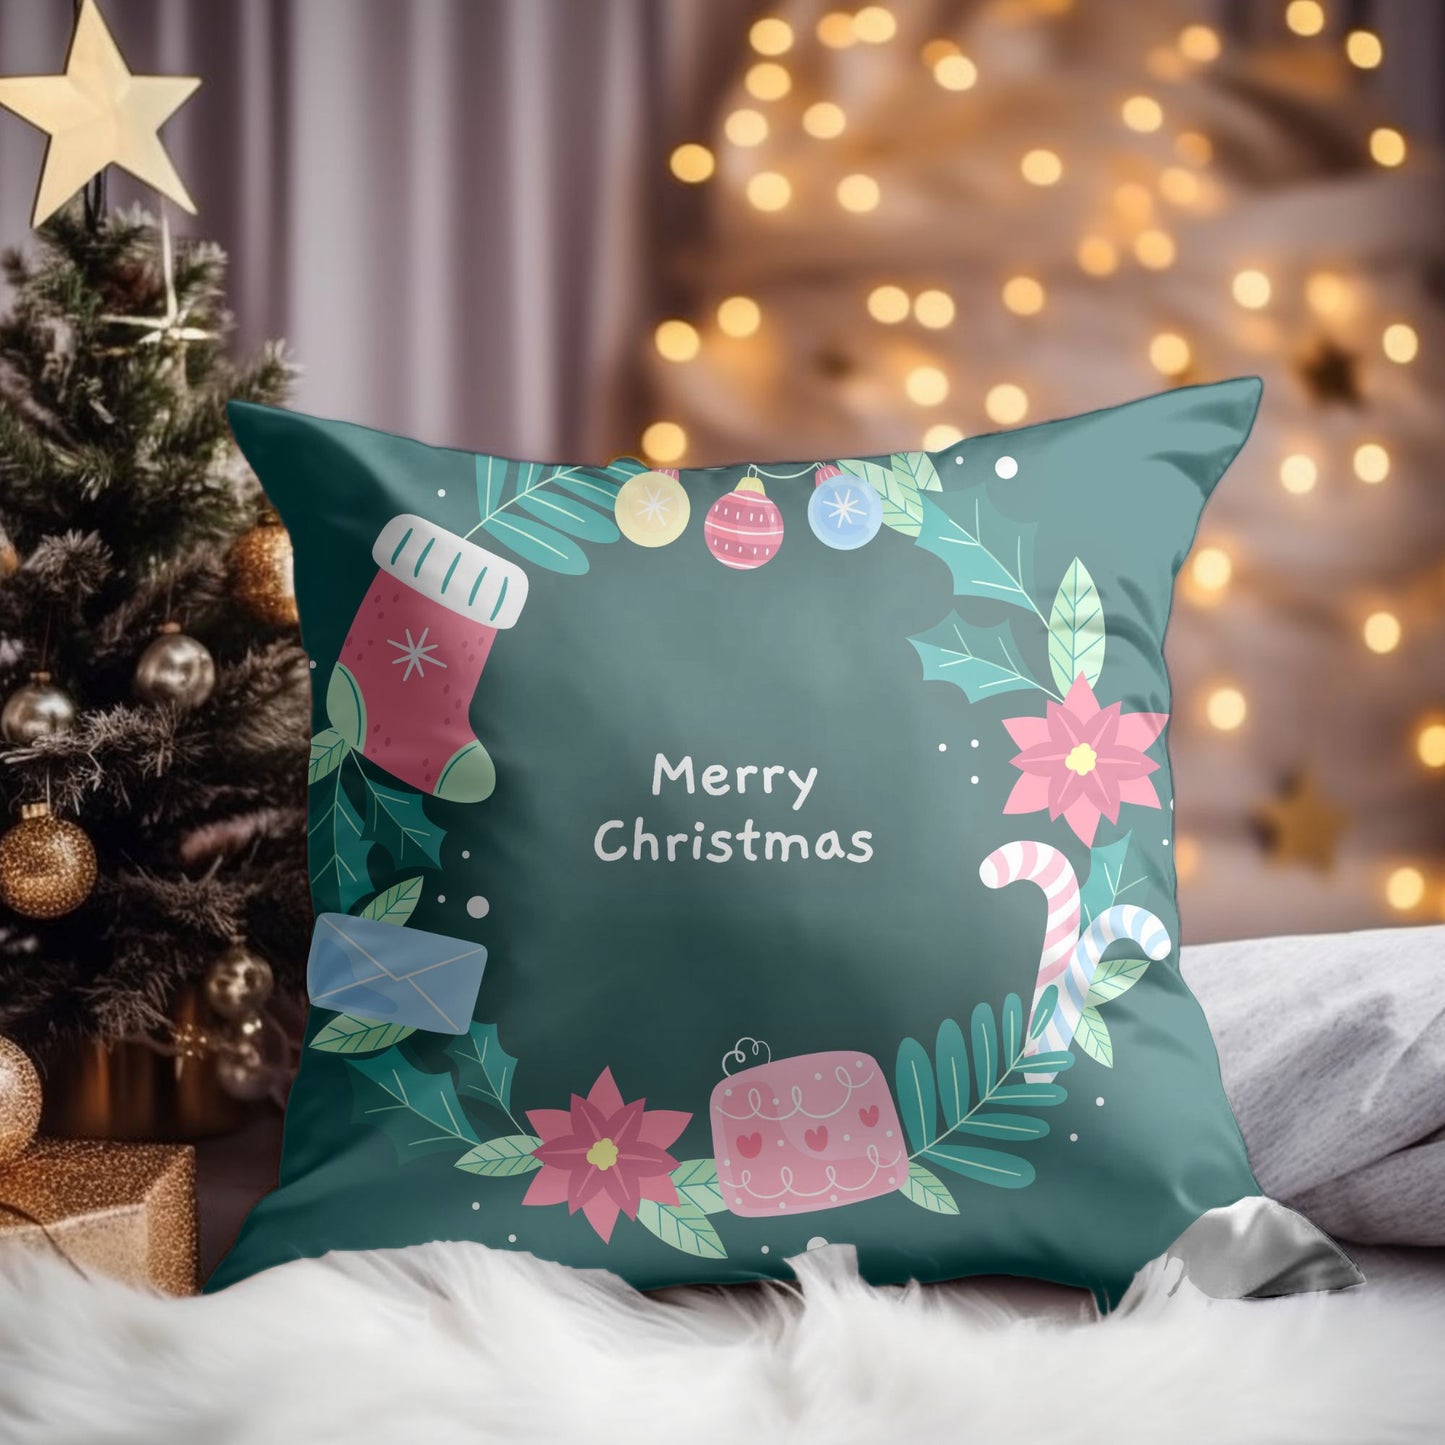 High-quality home welcome pillow for the holidays